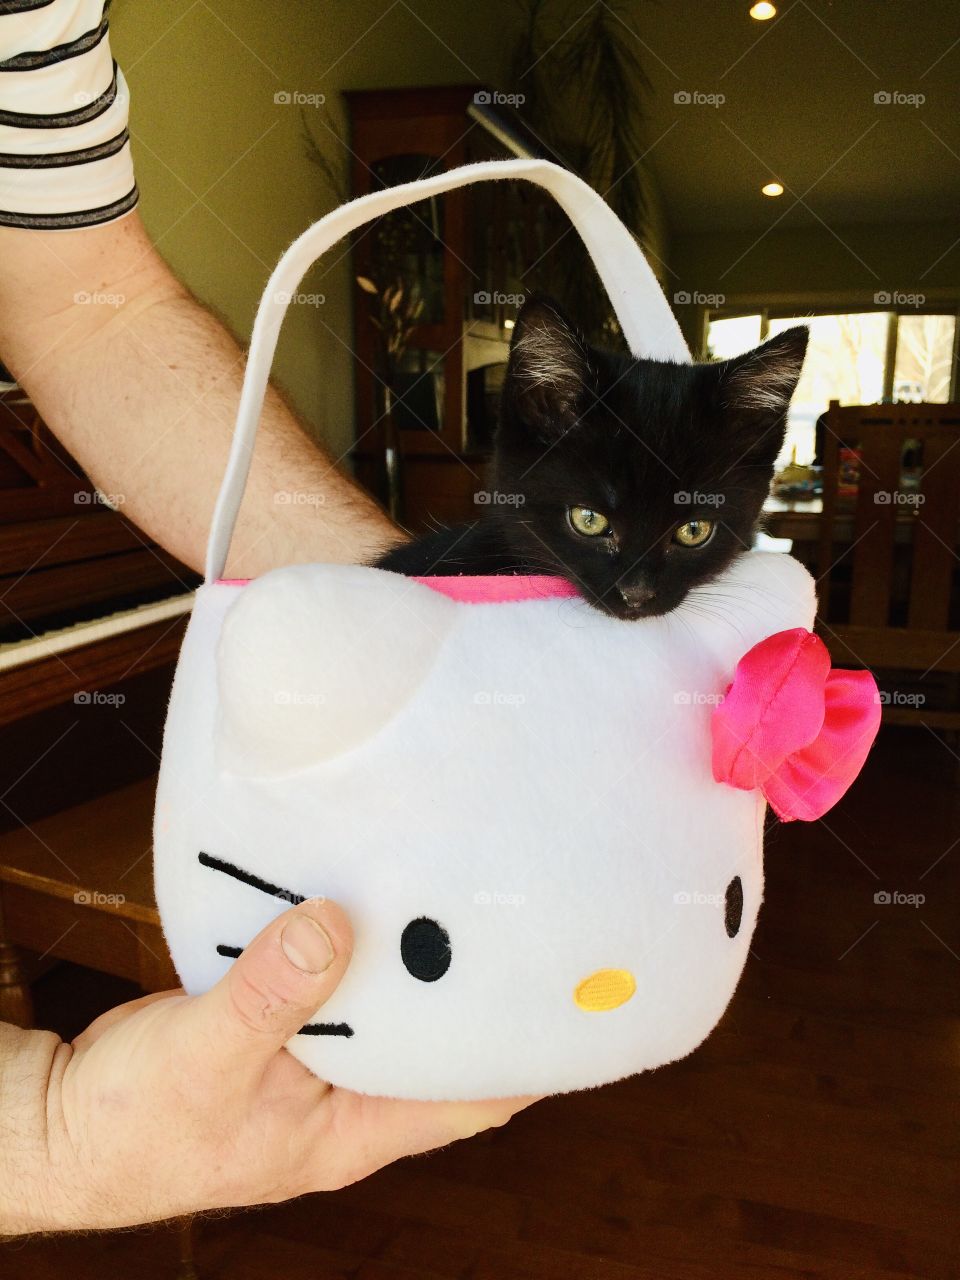 Adorable little black kitten with the sweetest little head sitting in white Hello Kitty Easter basket. 